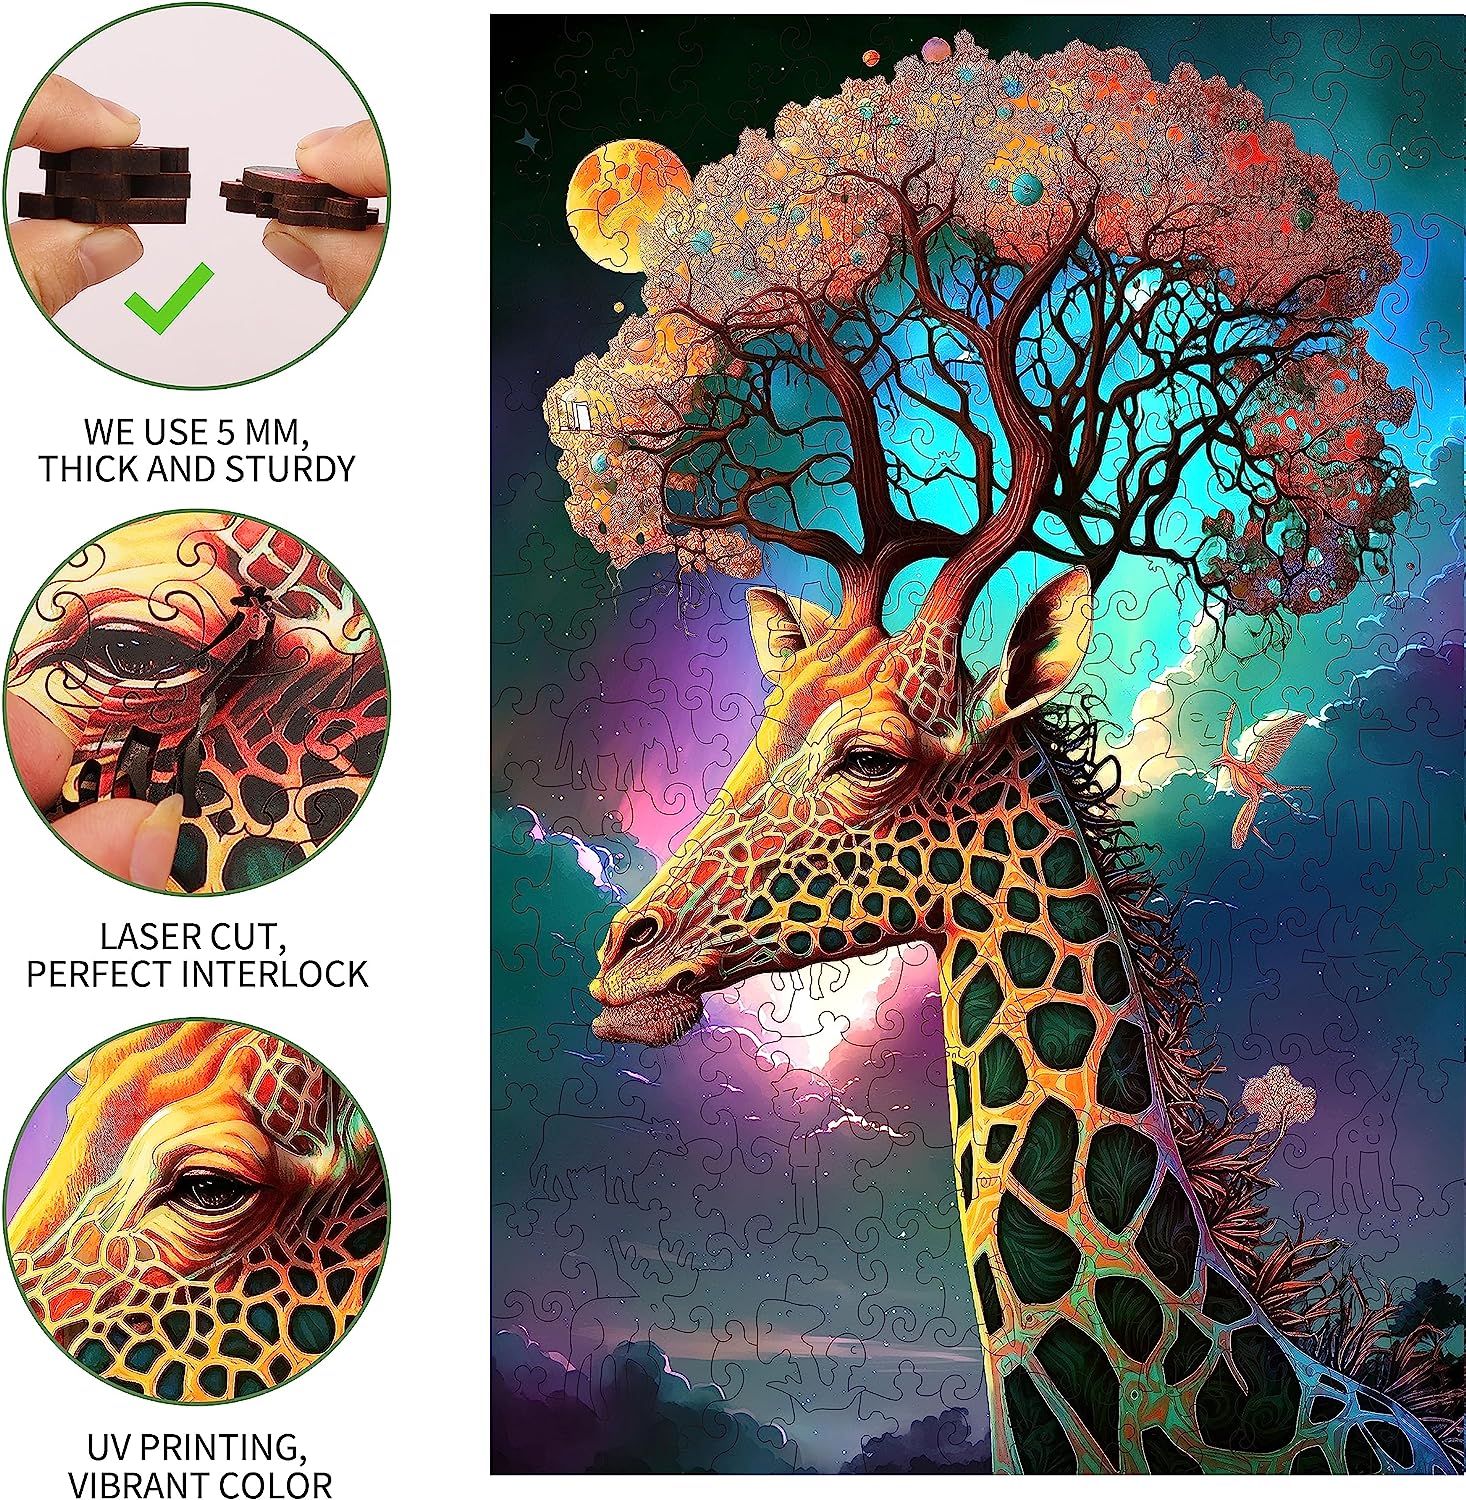 Wooden Jigsaw Puzzle for Adults Creative Gift for Parents Grandparents Thinking Giraffe 300 Pcs King Size Unique Shape Beautiful Box Fun Challenge Brain Exercise Game